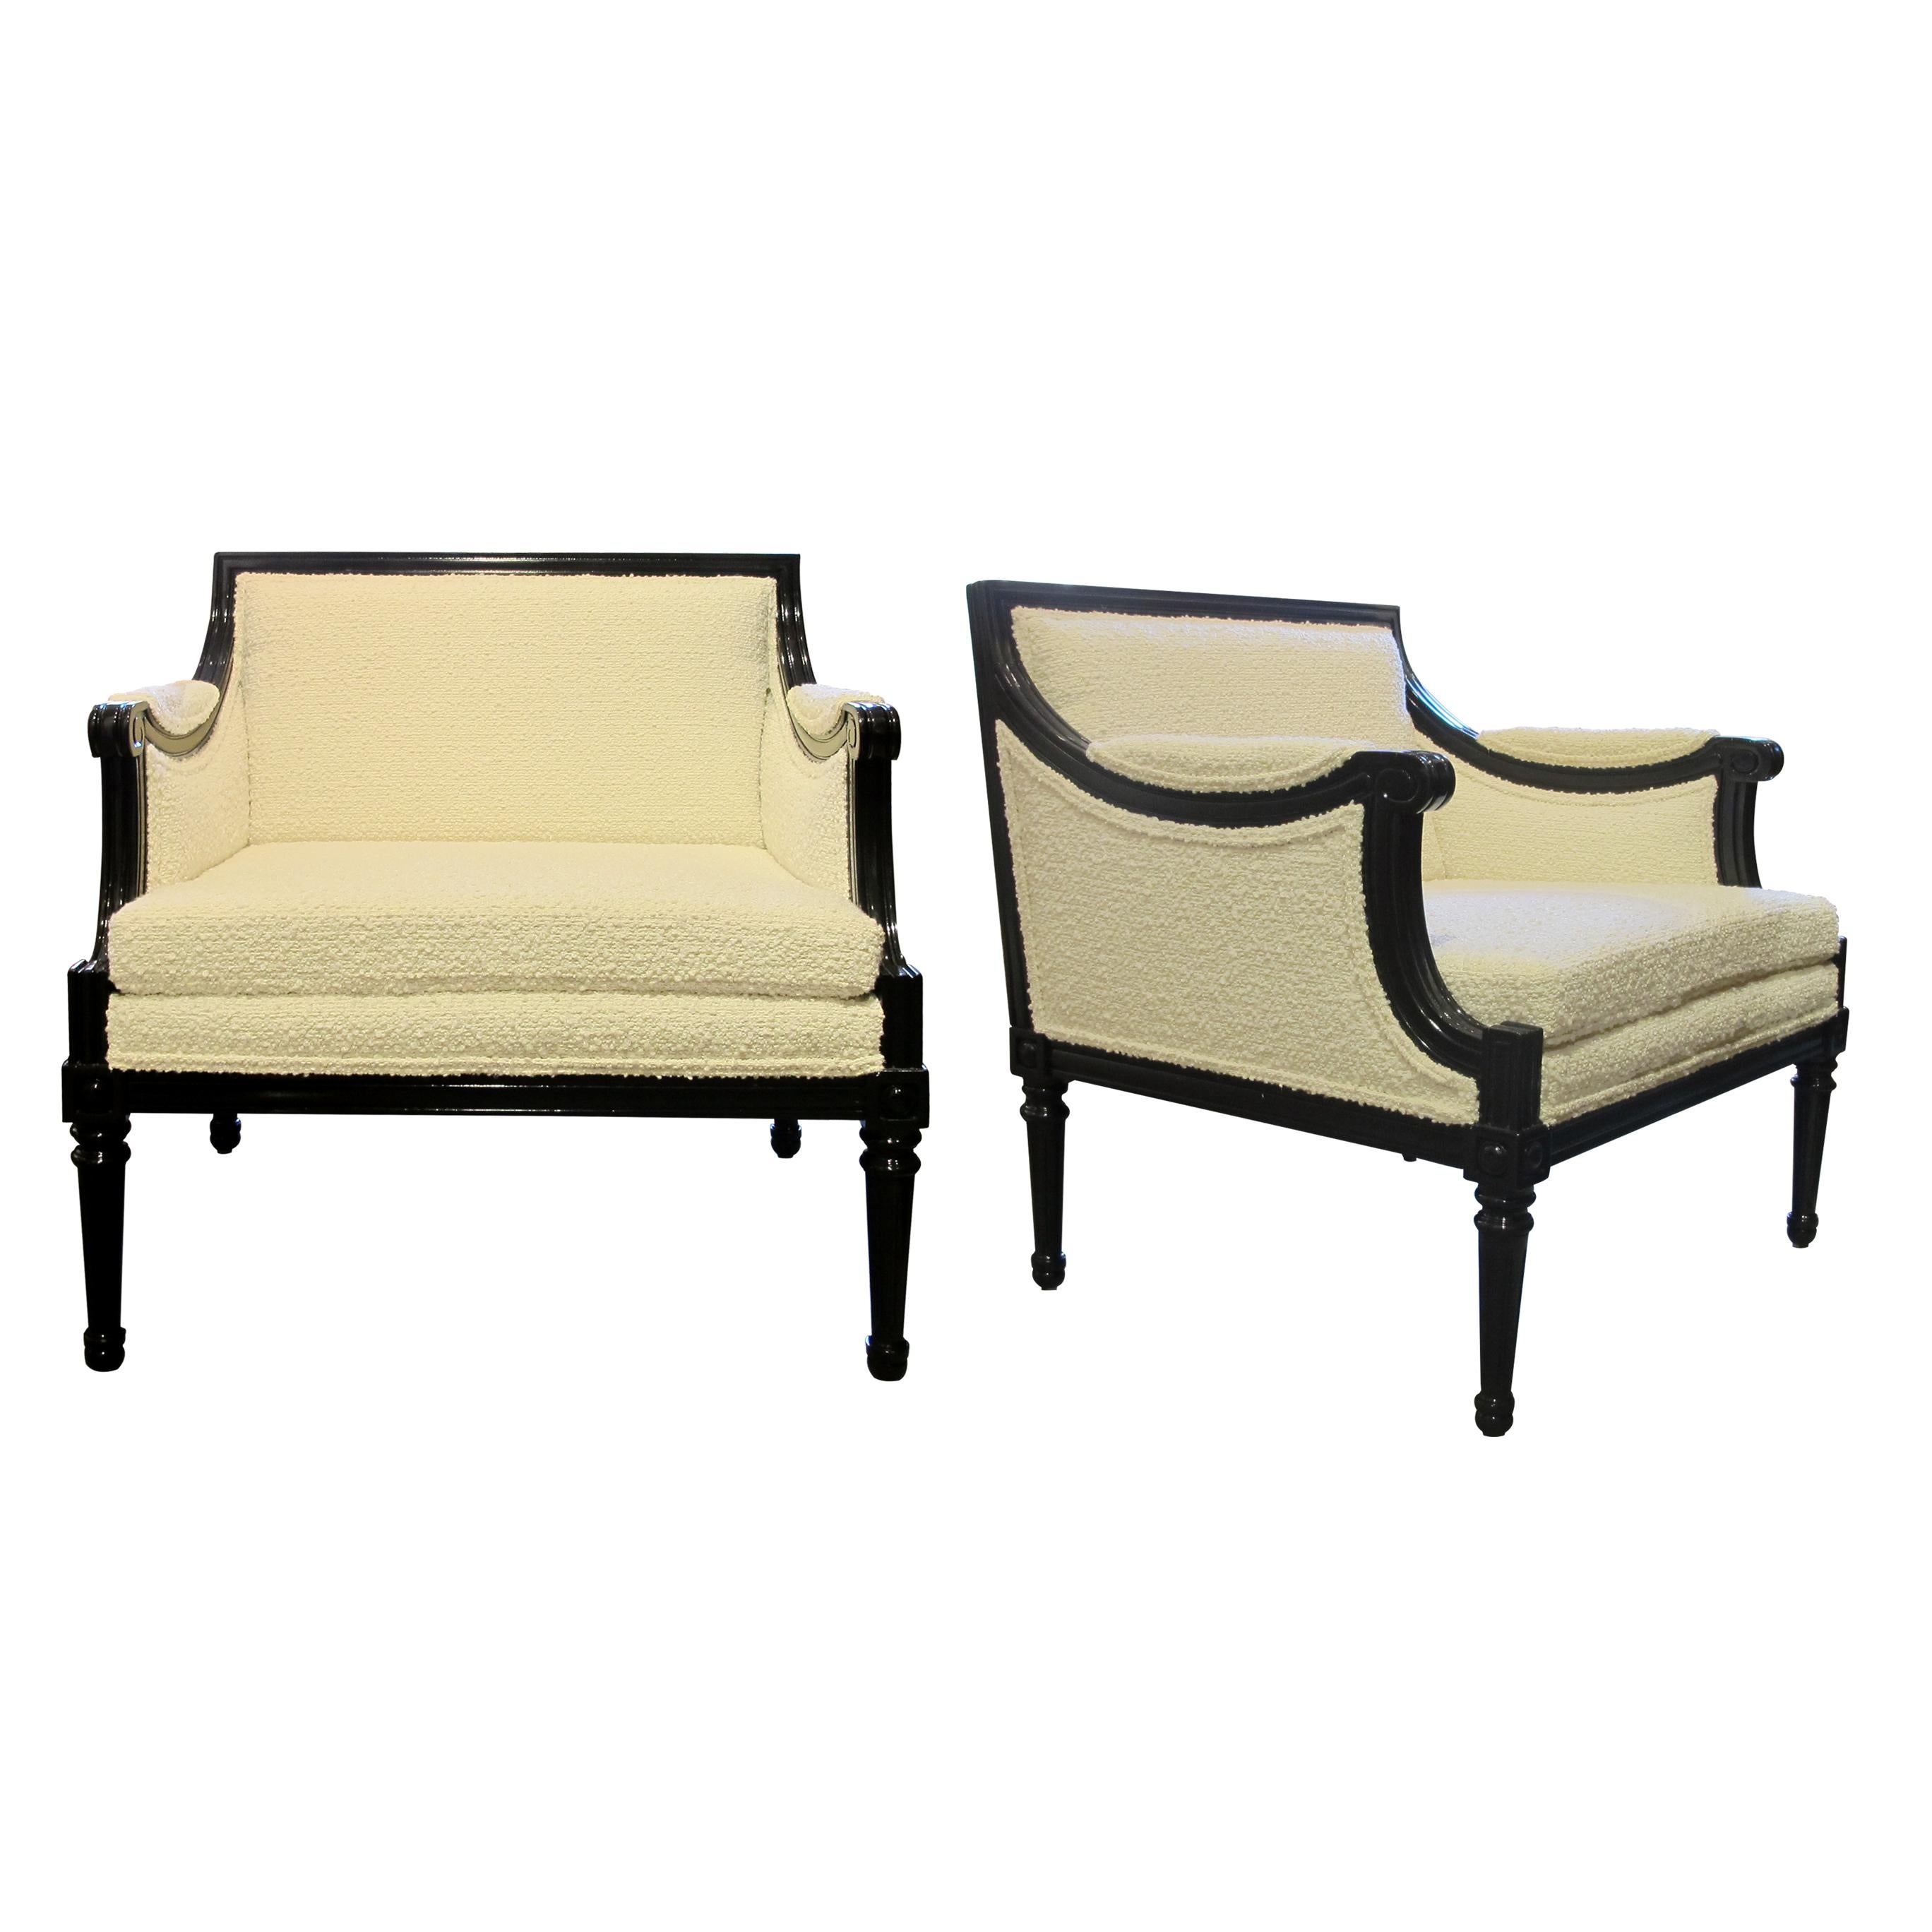 1960s, Pair of Swedish Gustavian Style Armchairs Newly Upholstered  For Sale